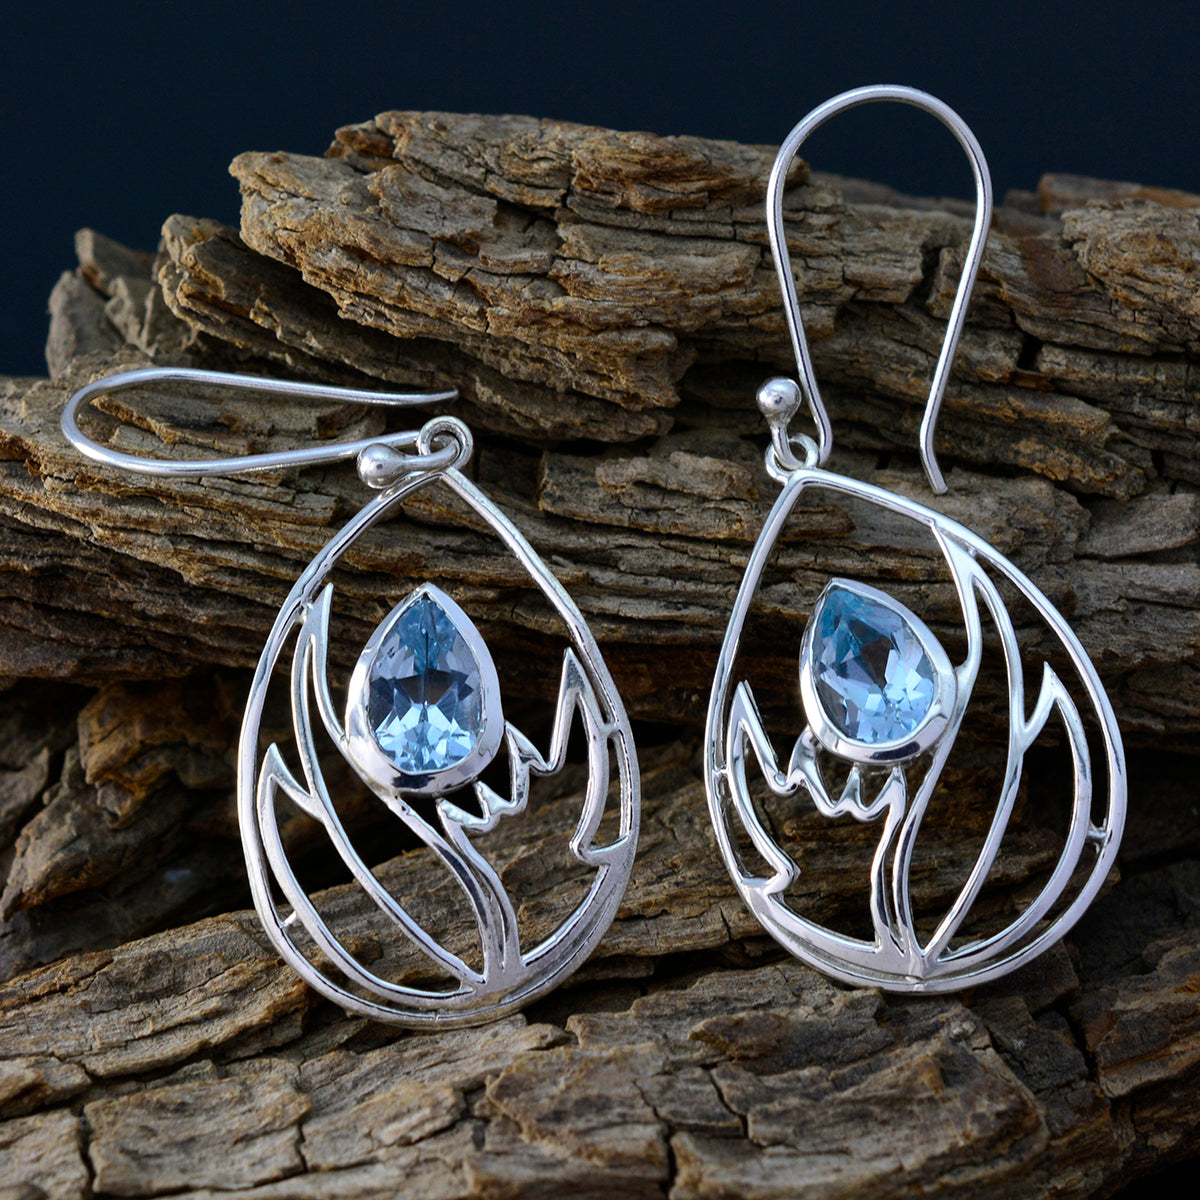 Riyo Genuine Gems Pear Faceted Blue Topaz Silver Earrings gift for mother's day